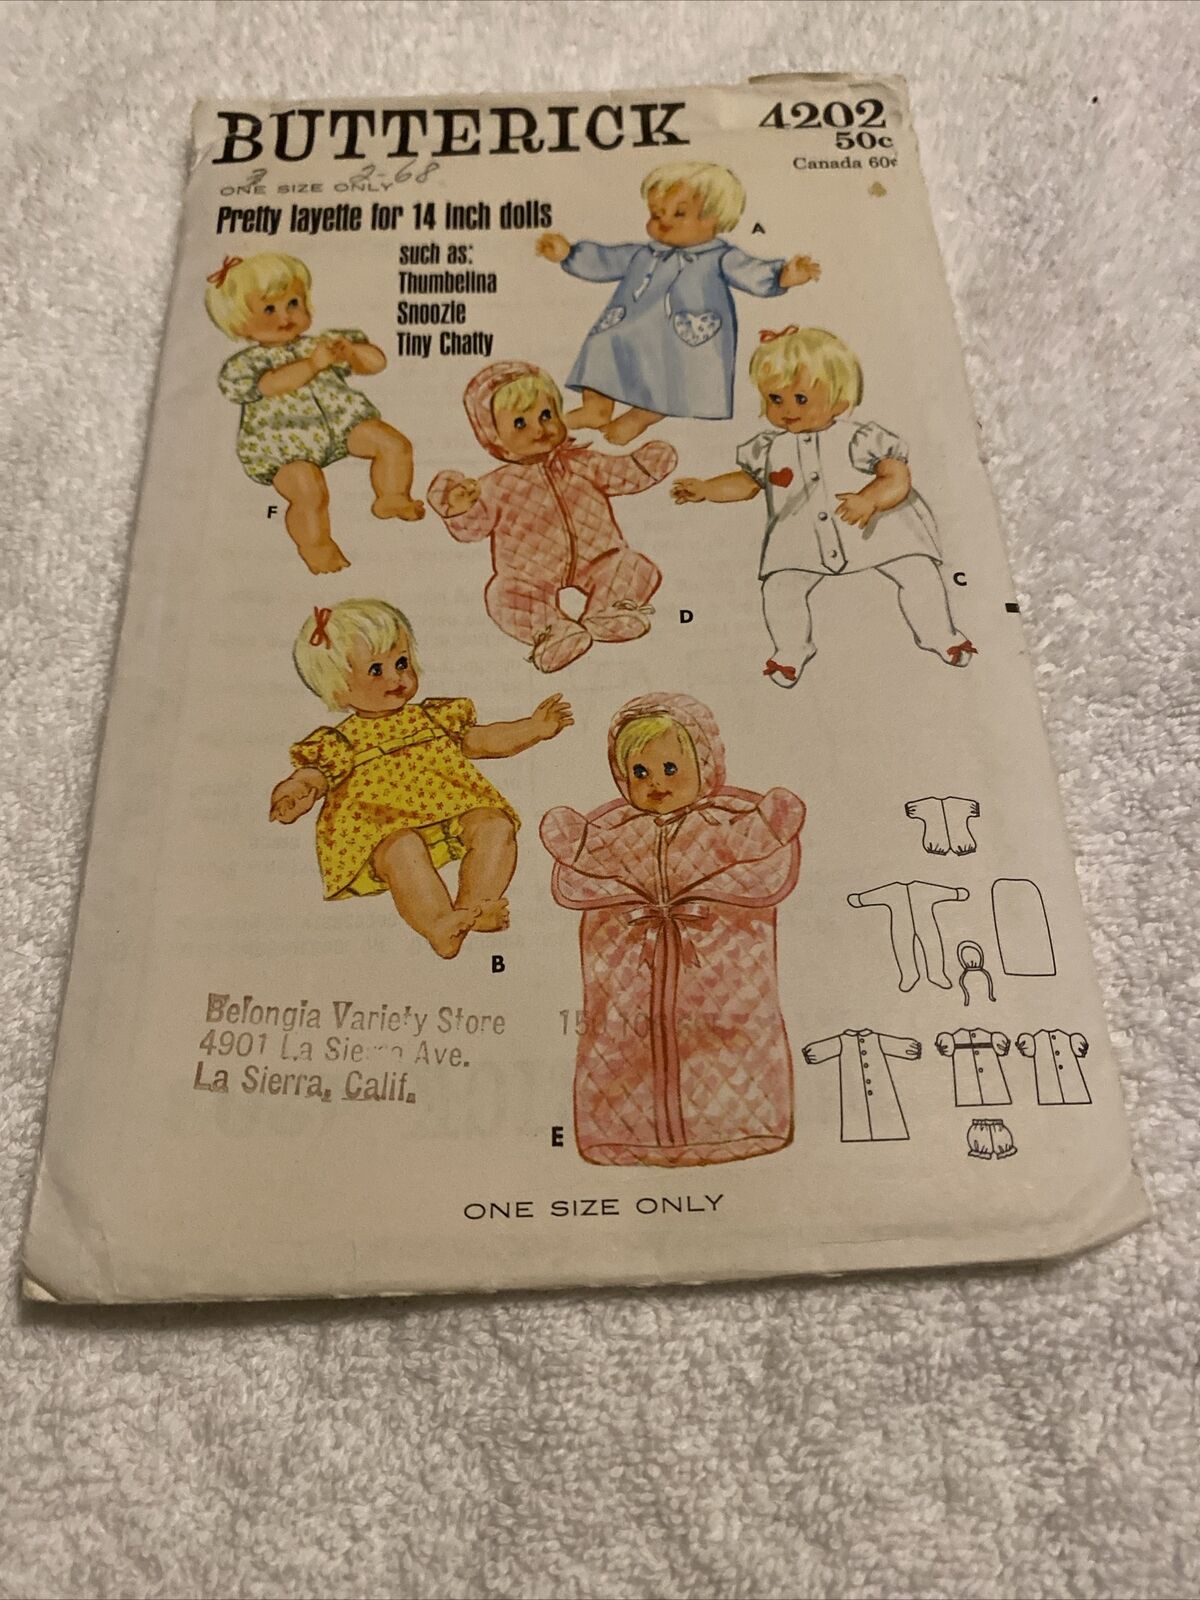 Vintage (Circa 1970's) Butterick Pattern #4202. Pretty Layette for 14 Inch Doll.